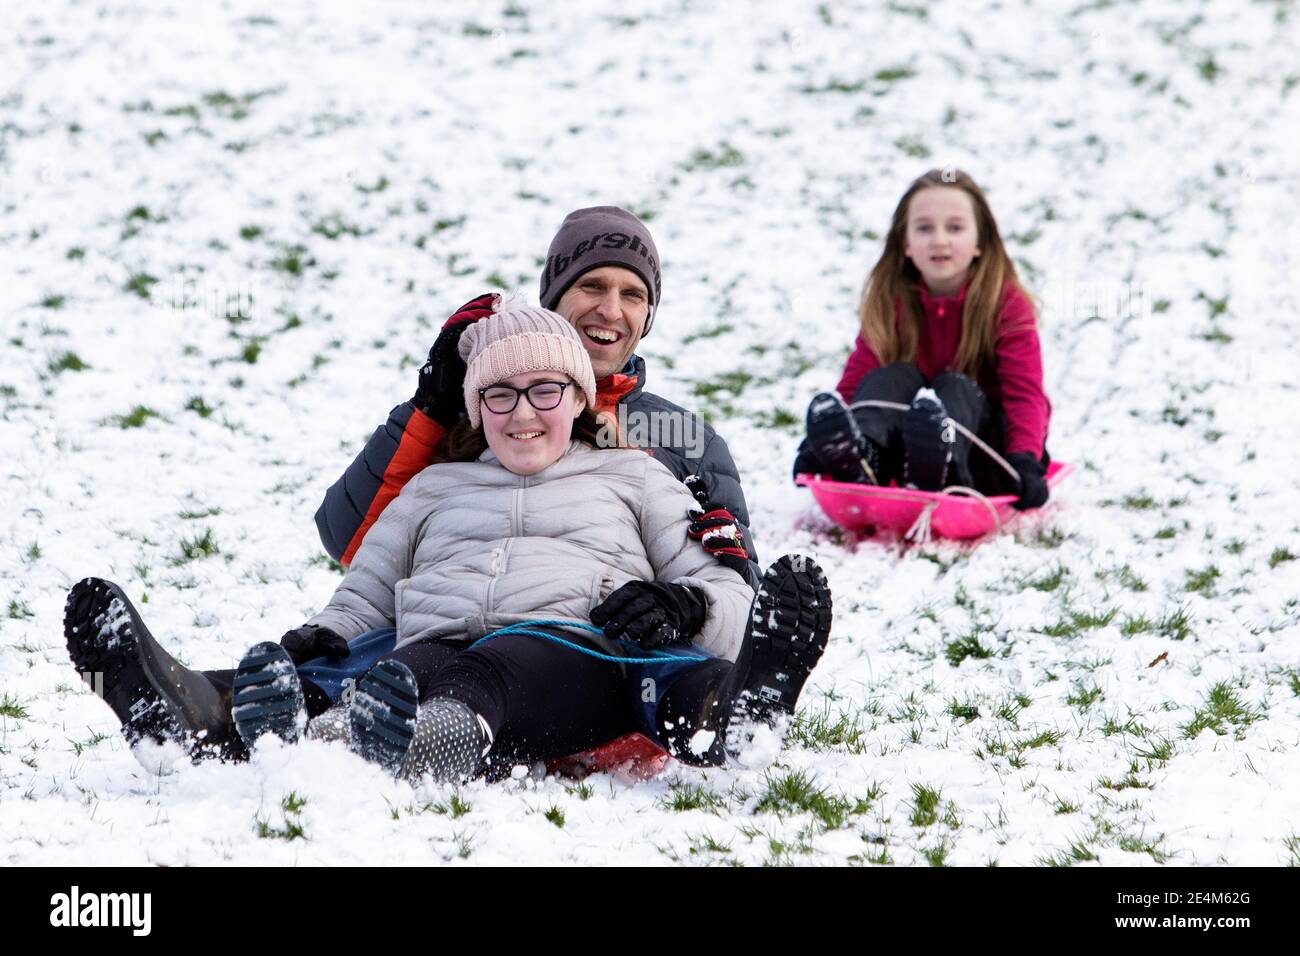 Chippenham, Wiltshire, UK. 24th January, 2021. As Chippenham residents wake up to their first snow of the year, a couple and a child are pictured in a local park in Chippenham as they slide down a hill on sledges. Credit: Lynchpics/Alamy Live News Stock Photo